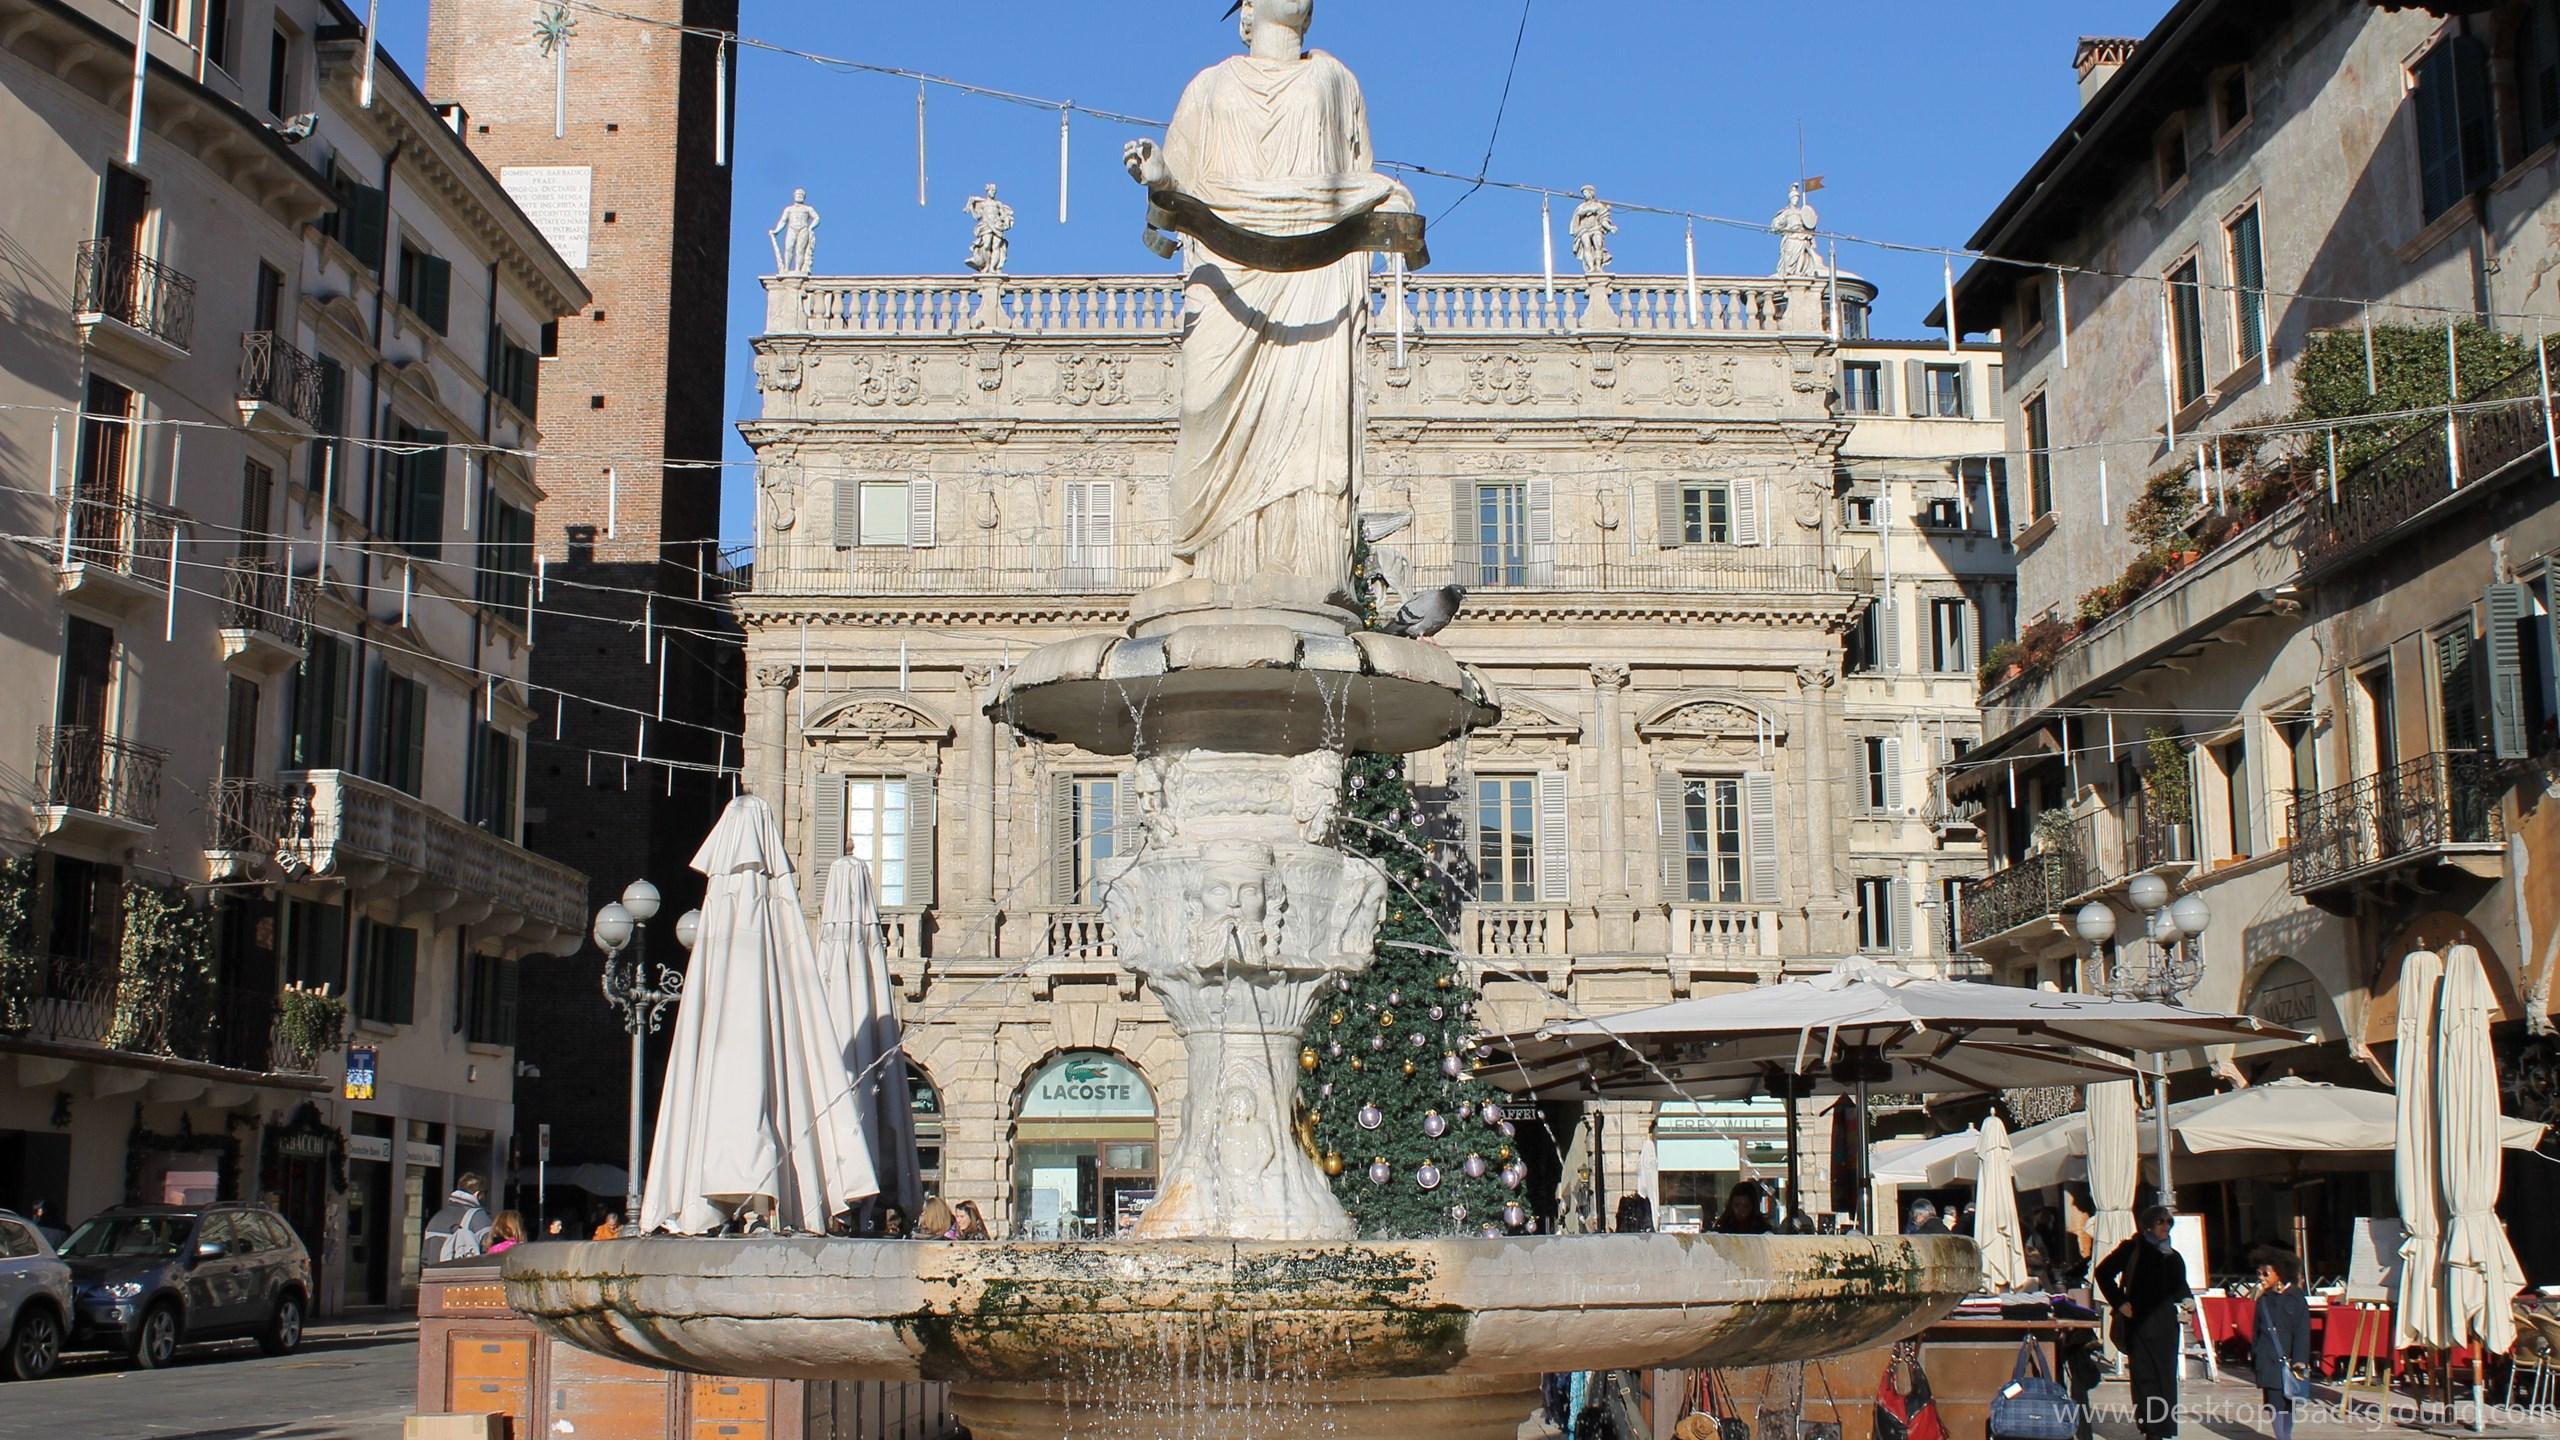 Fountain On The Street In Verona, Italy Wallpaper And Image